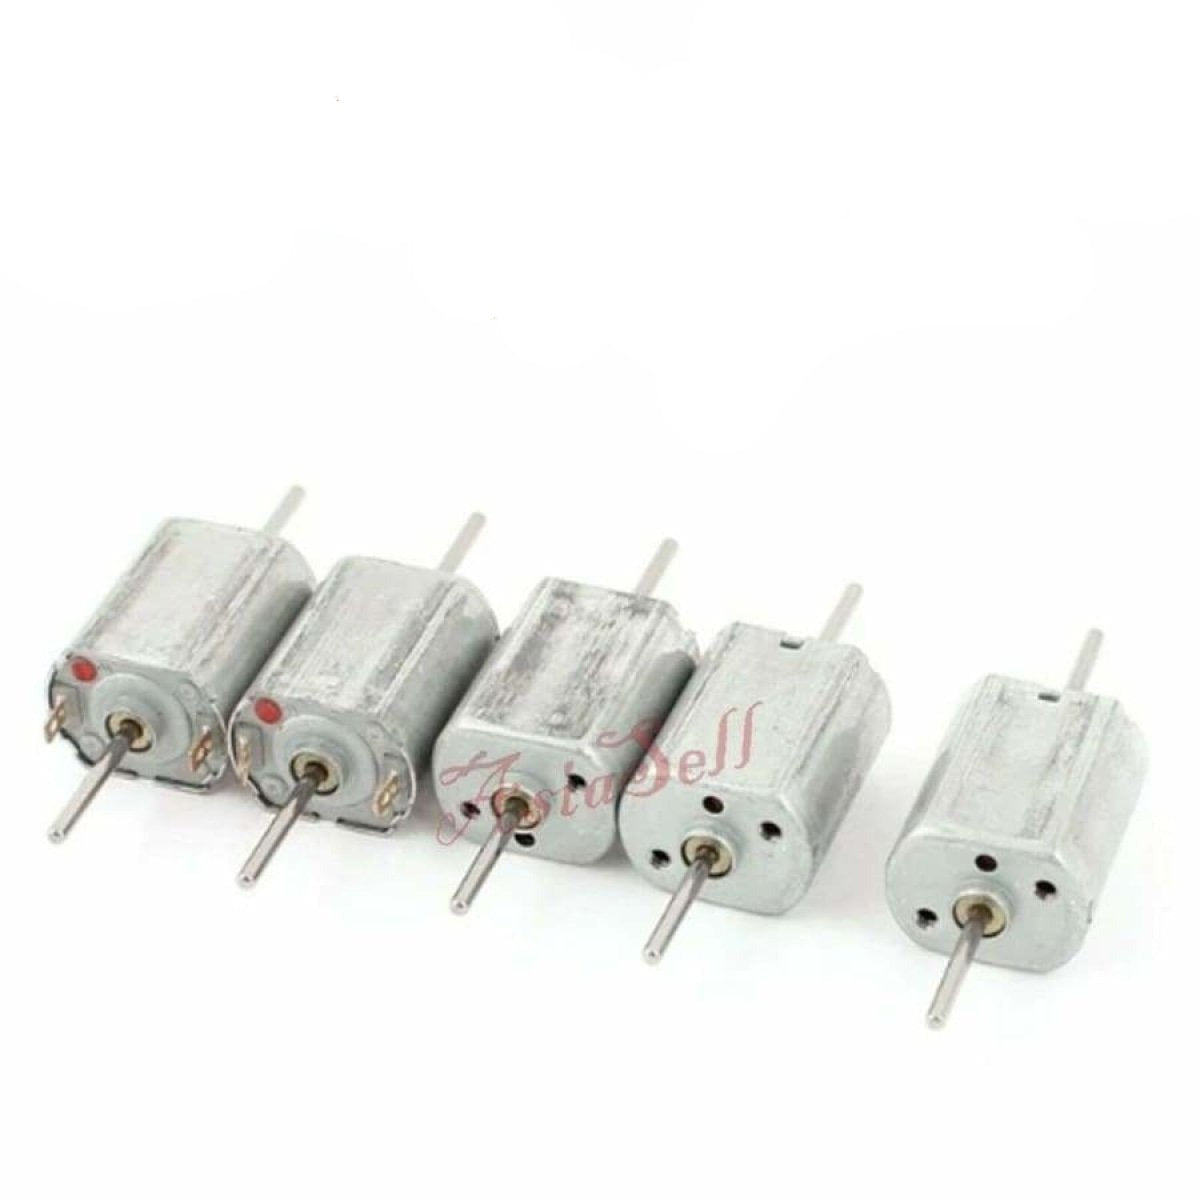 5pcs 12V 13500RPM Motors 1.5mm Double Shaft Mini Electric DC Motor for DIY Toy | Asia Sell